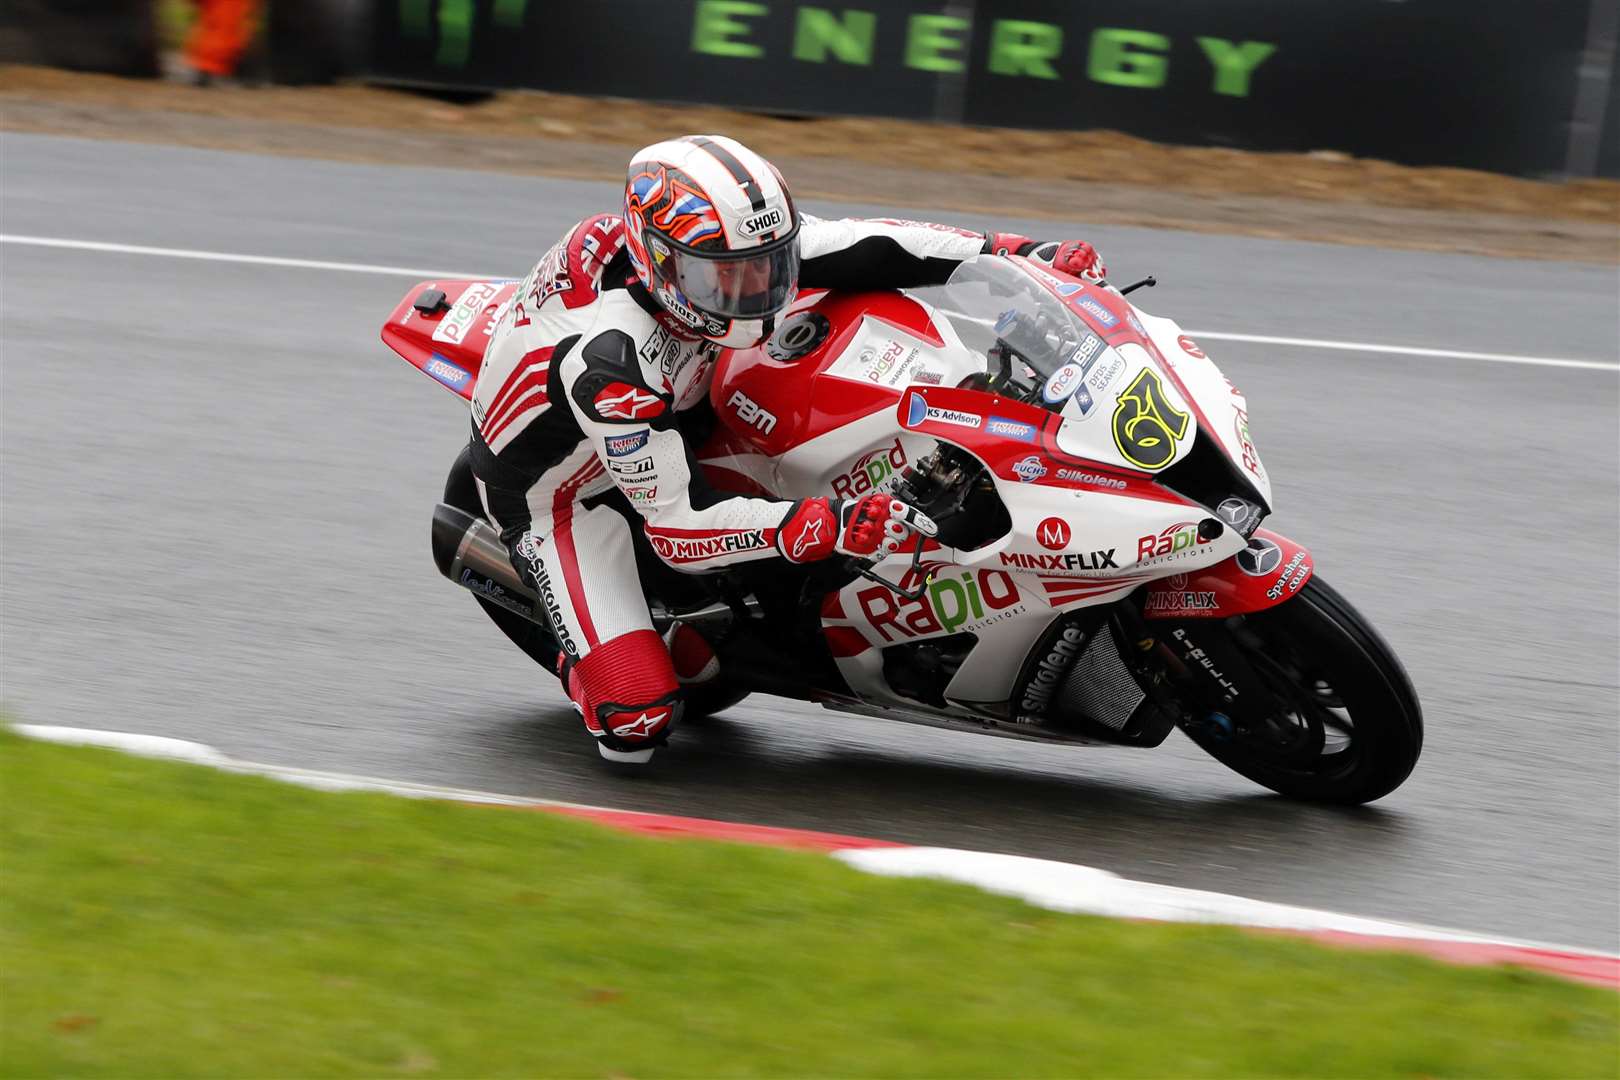 Shakey Byrne in action on the race-track